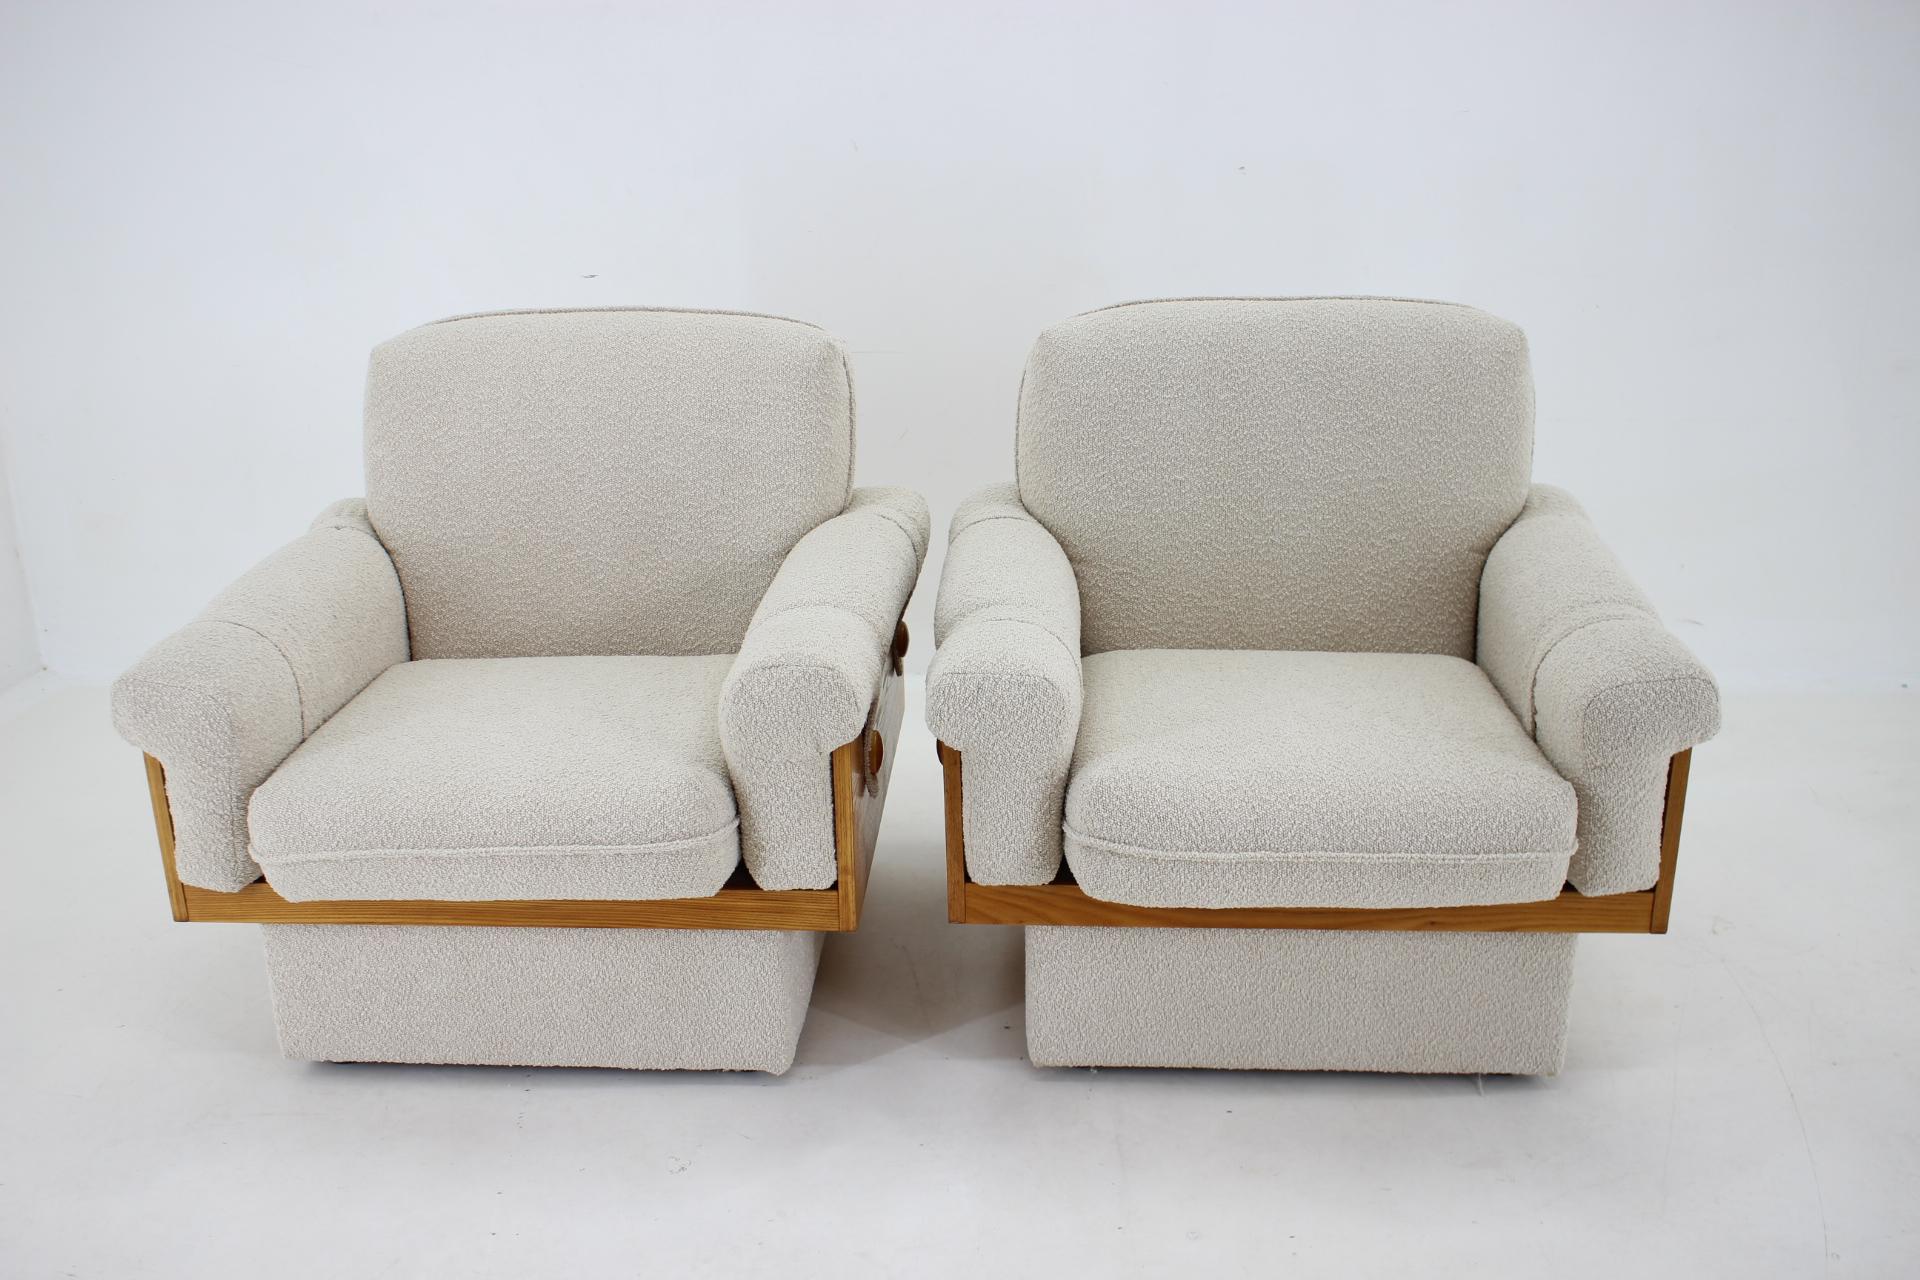 1970s Pair of Armchairs in Boucle Fabric, Czechoslovakia For Sale 1